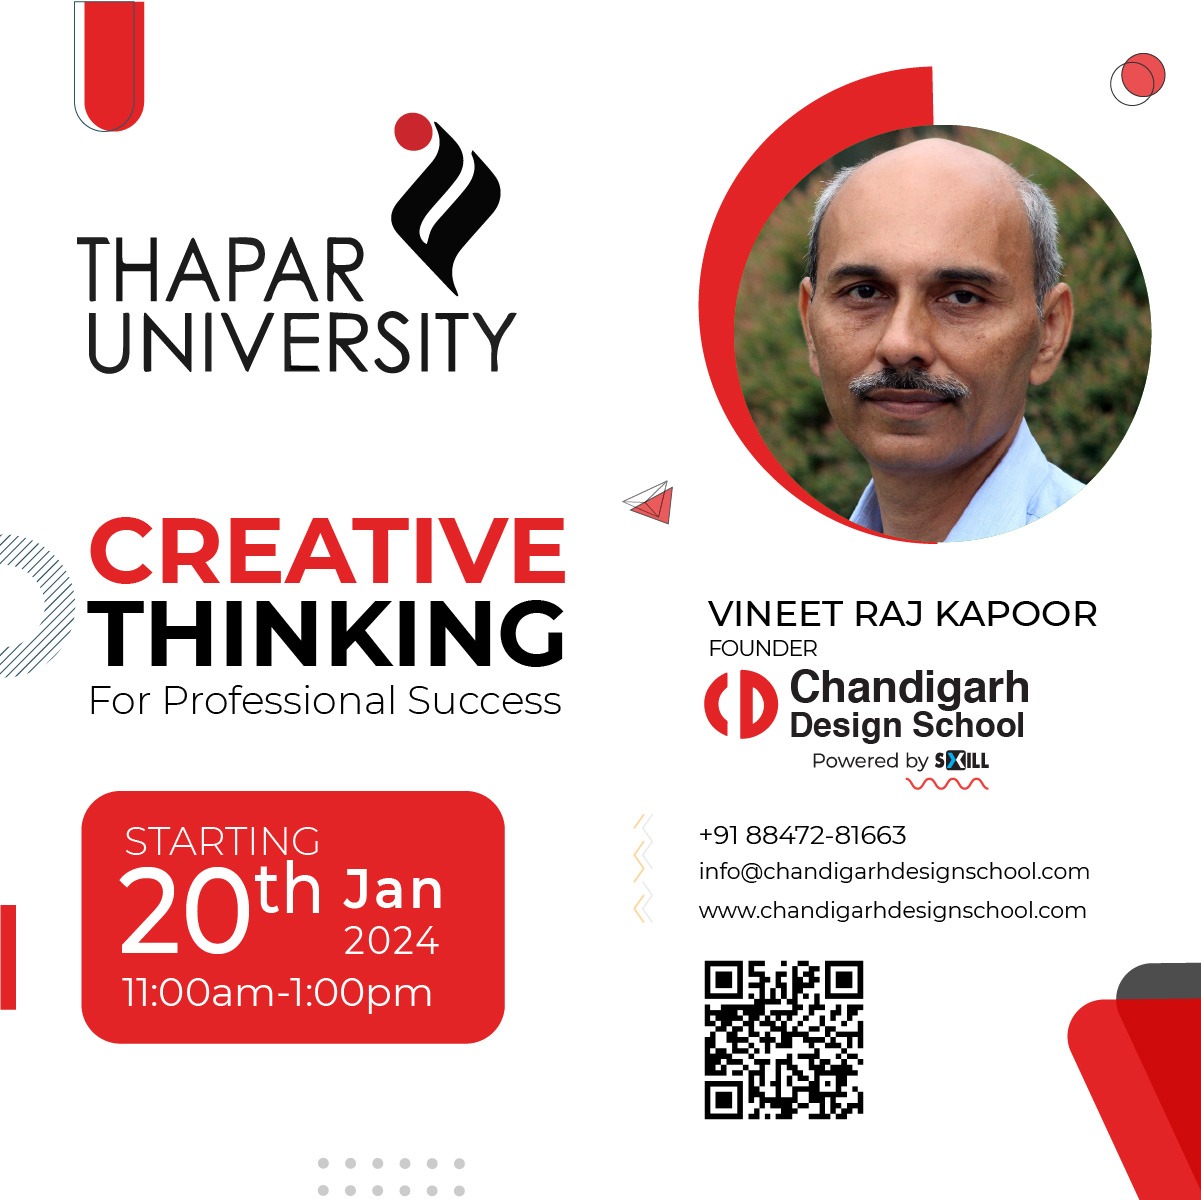 Chandigarh Design School has started a course at Thapar Institute of Engineering and Technology (TIET) also known as Thapar University on the subject “Creative Thinking for Professional Success”. This subject would run for the complete semester as is an optional course for students across all branches and years. This makes it one of the most important options for students wanted to rein in their creativity for benefit. During this class Vineet Raj Kapoor (Indian IDT Expert Worldskills, and Founder Chandigarh Design School) shared, “Creativity is not the right of an individual but a practice of a patient individual”. He comments that anyone with the patience, grit and determination can rein in their creativity. This is the first collaboration between Thapar University and Chandigarh Design School (powered by SXILL).